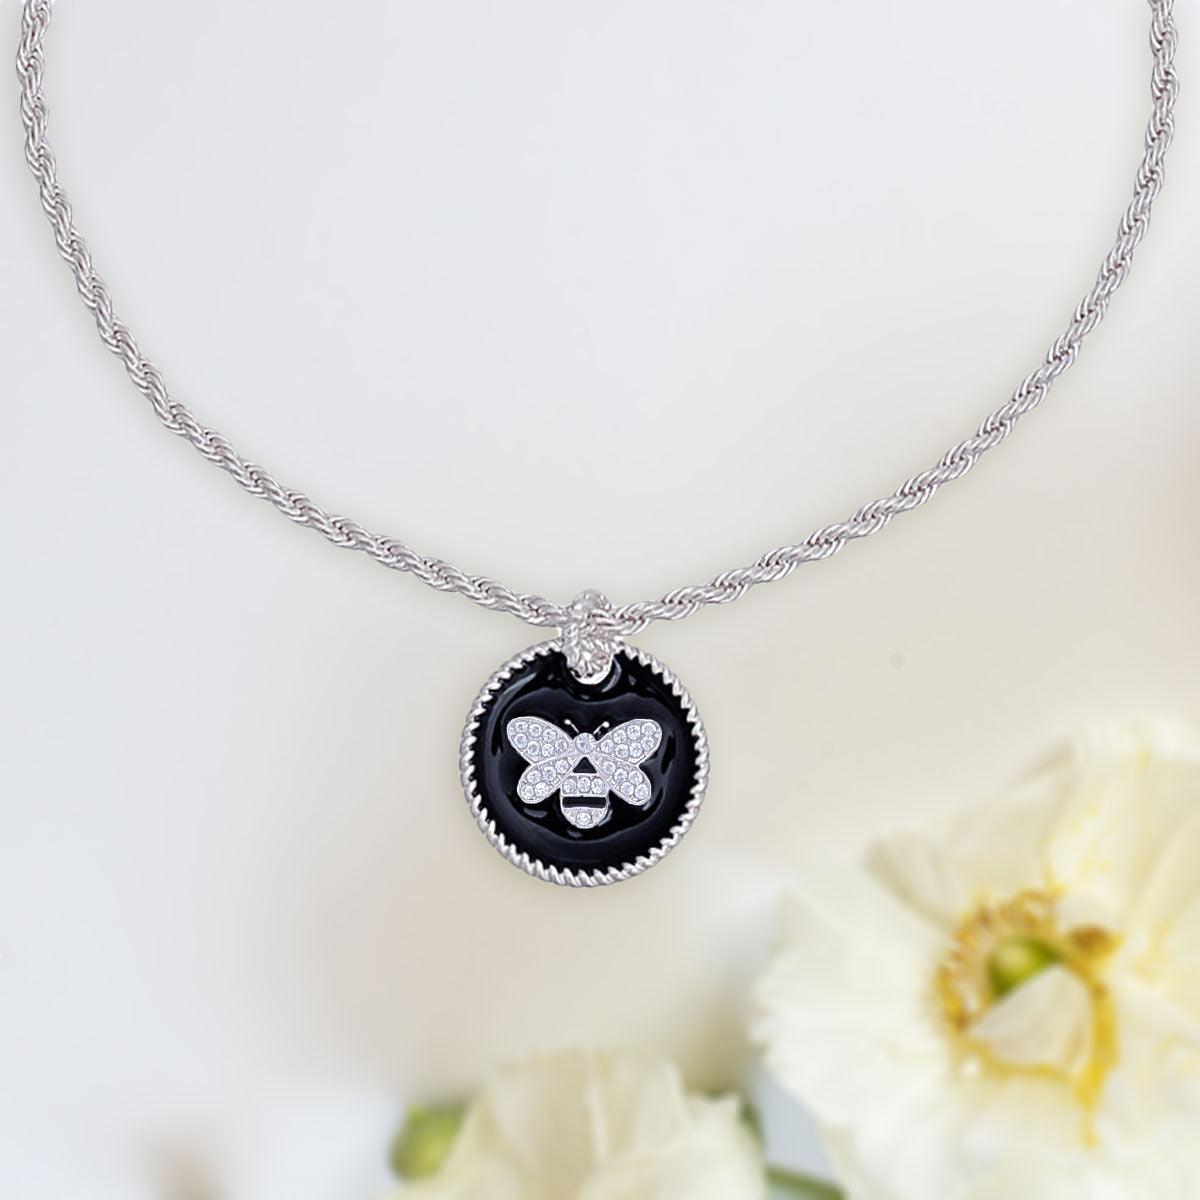 Stunning Black Silver Bee Necklace - Shop Fashion Jewelry Now